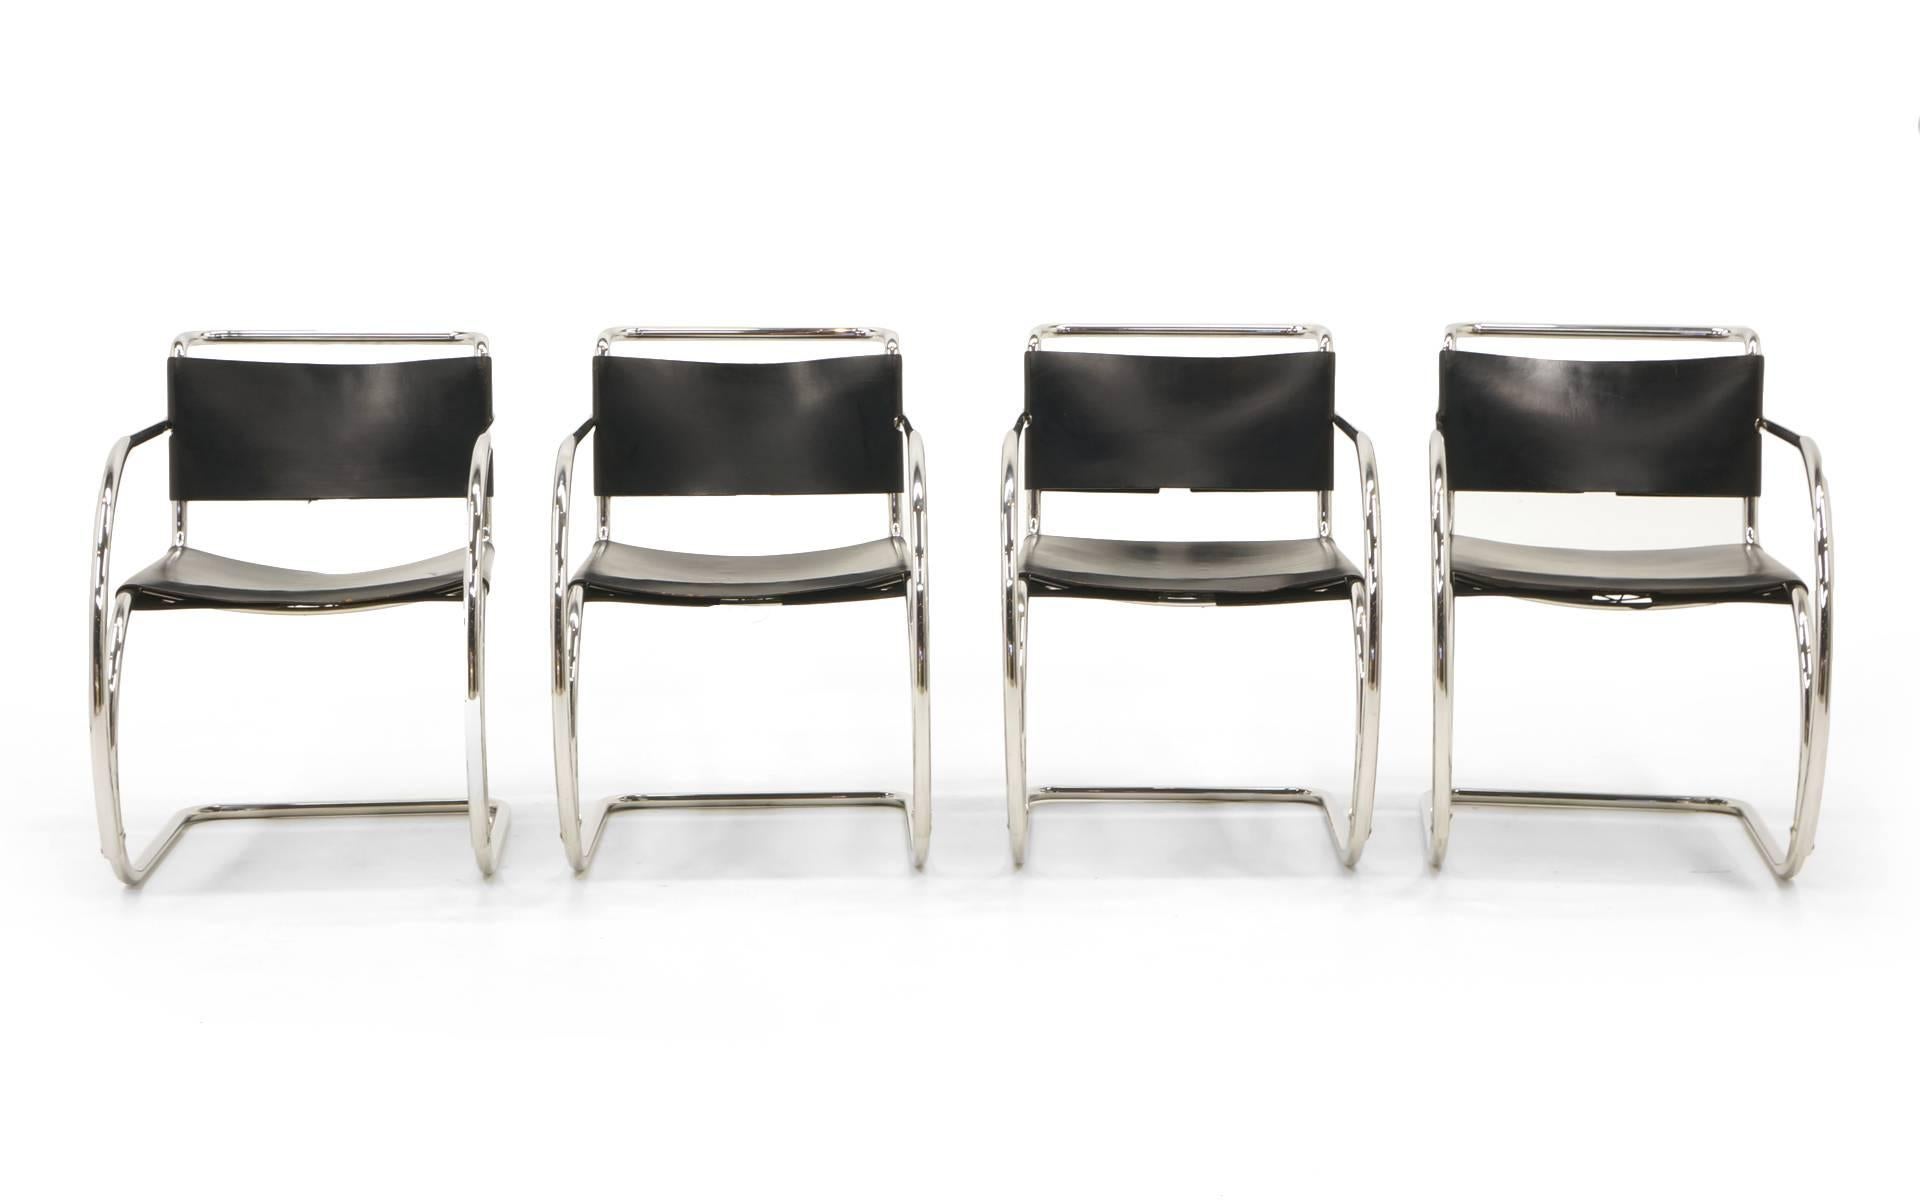 Four Ludwig Mies van der Rohe black leather and chrome tubular steel MR 20 armchairs. Manufactured by Knoll in Italy, these 1960s production are in original condition with only attractive minor wear. Nice examples of this design in a matched set. 